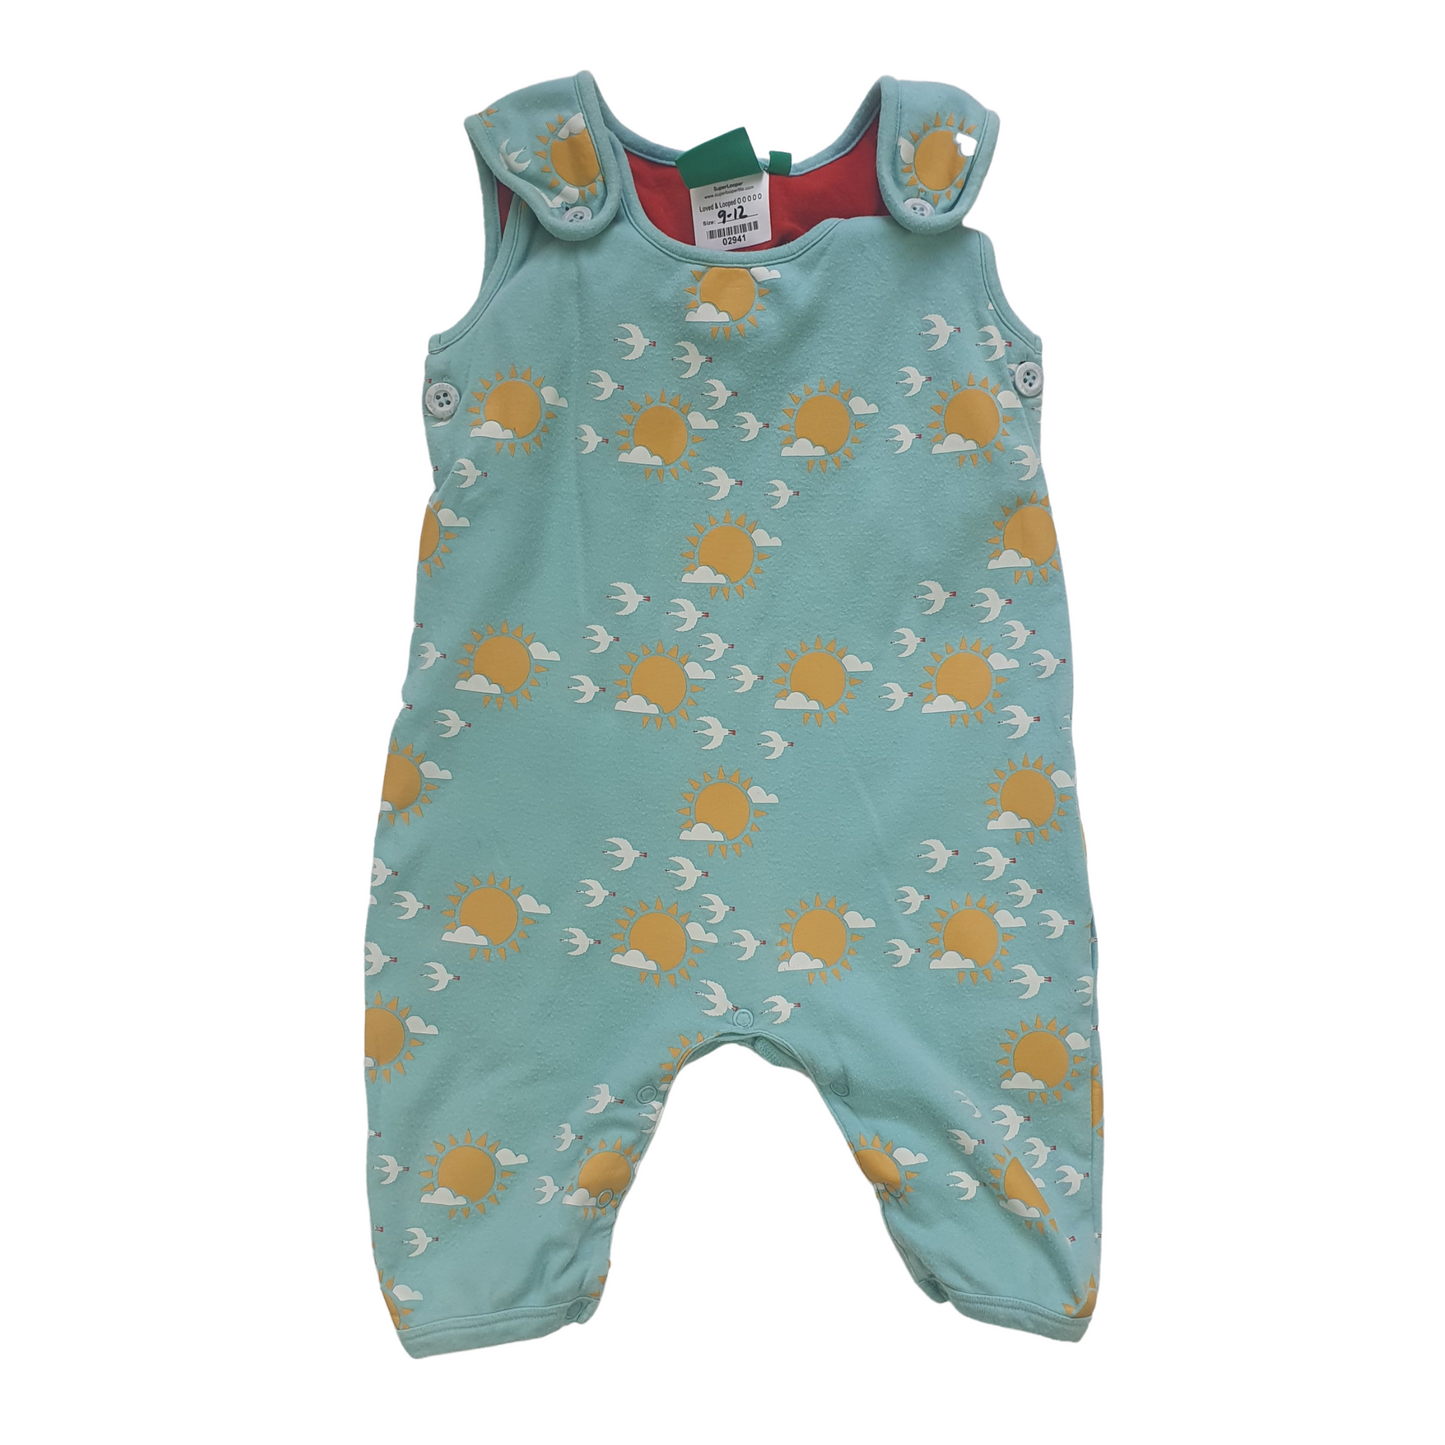 Dungaree Romper with sunshine and seagull print.